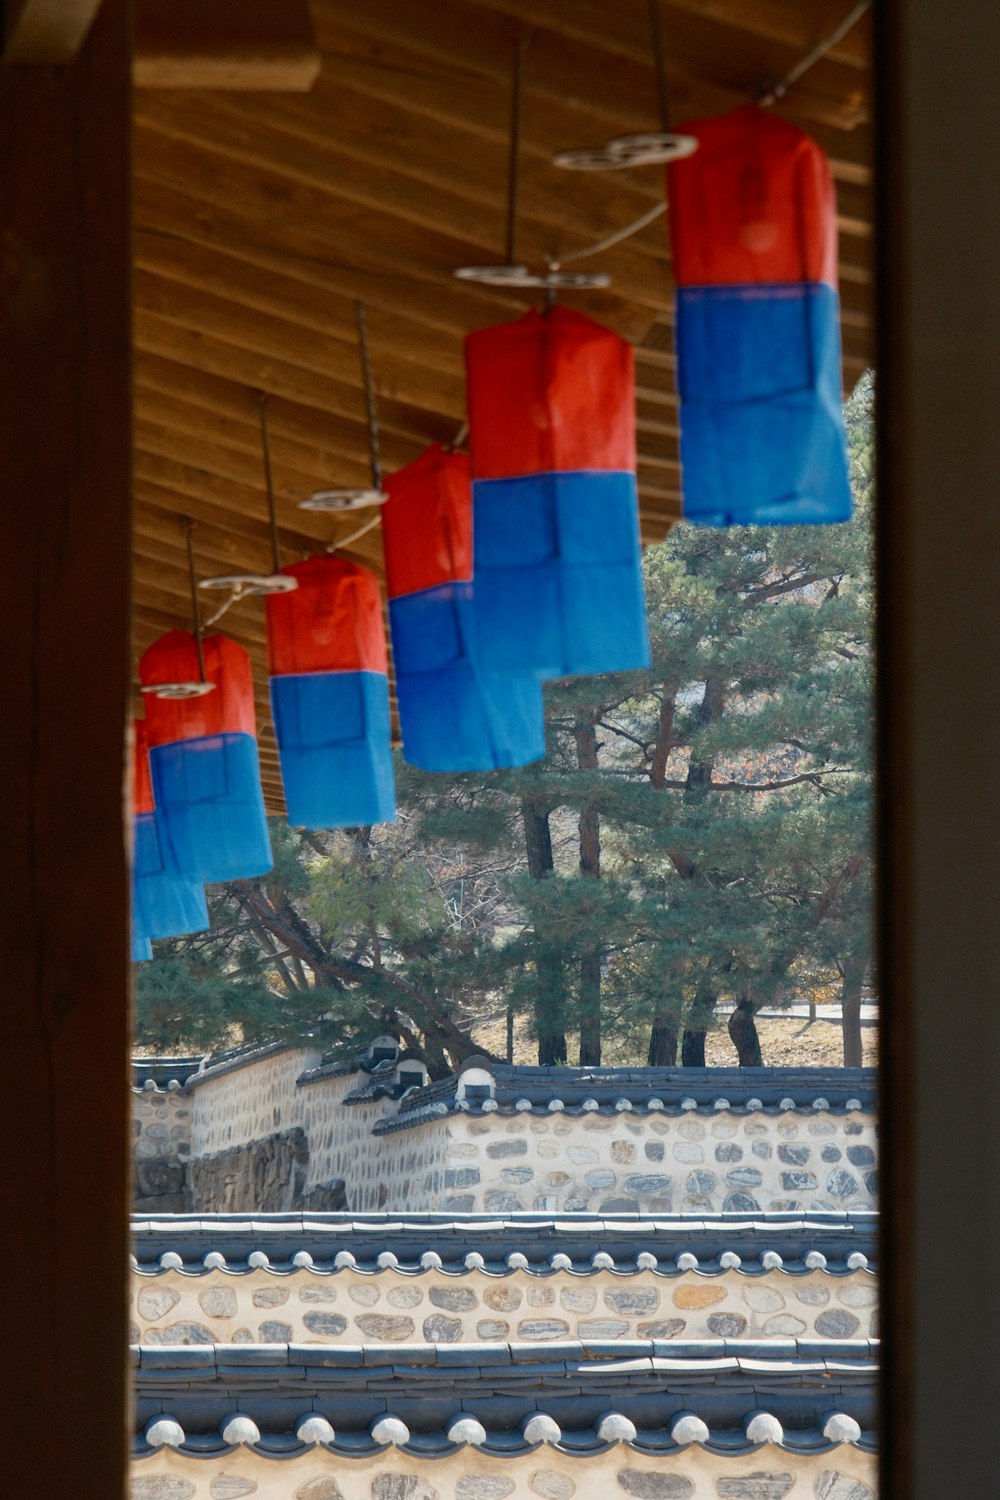 red and blue lanterns hanging from a roof